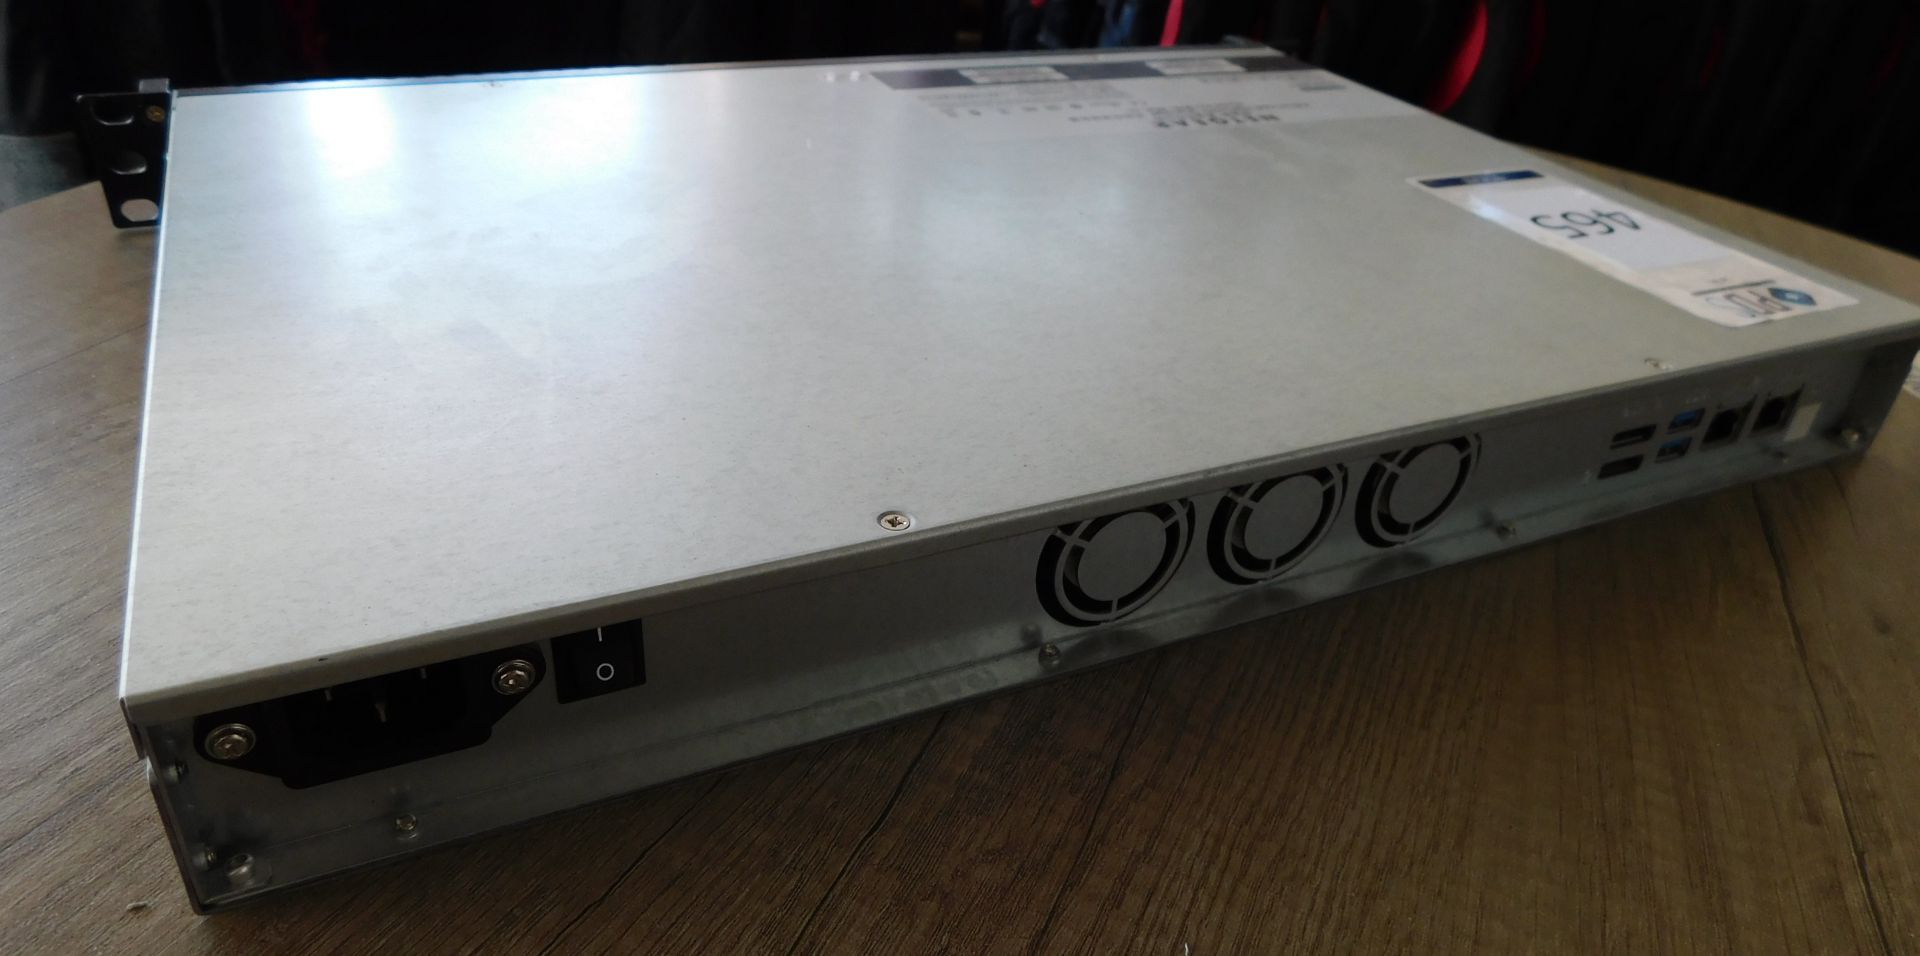 Net Gear RN2120V2 Advanced Network Storage (No HDDs) (Location: Stockport. Please Refer to General - Image 3 of 4